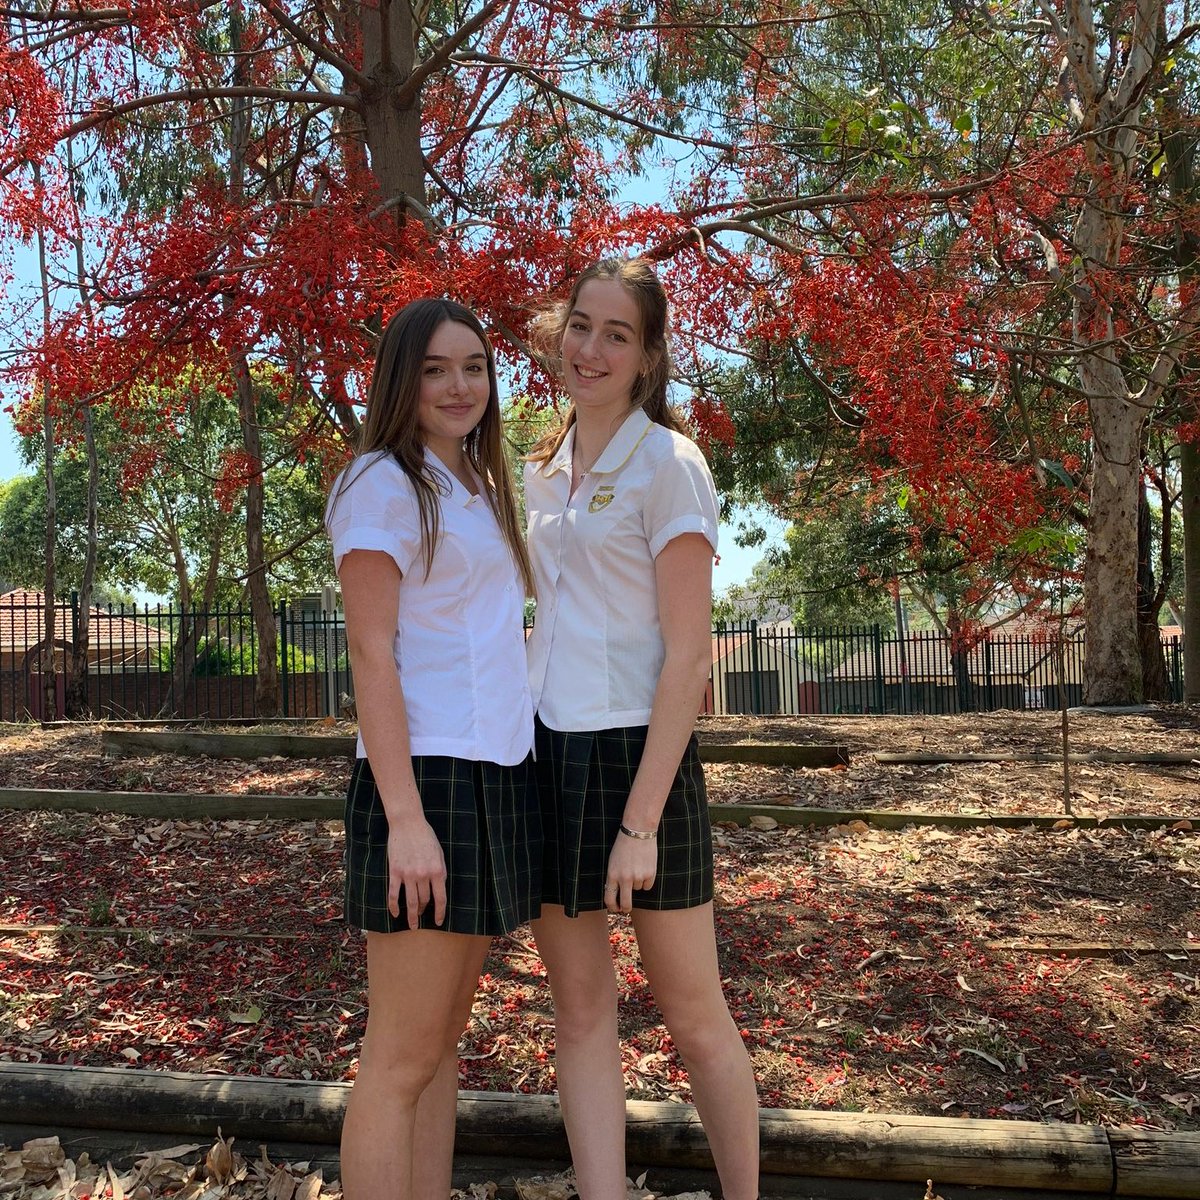 Aoife Collins and Hannelore Pusenjak were successful in the application of the Lizard Island Coral Reef Study Tour in 2020, a highly competitive program with only 16 places available state wide! CONGRATULATIONS GIRLS!! @austmus #girlsinSTEM #environment #advocacy